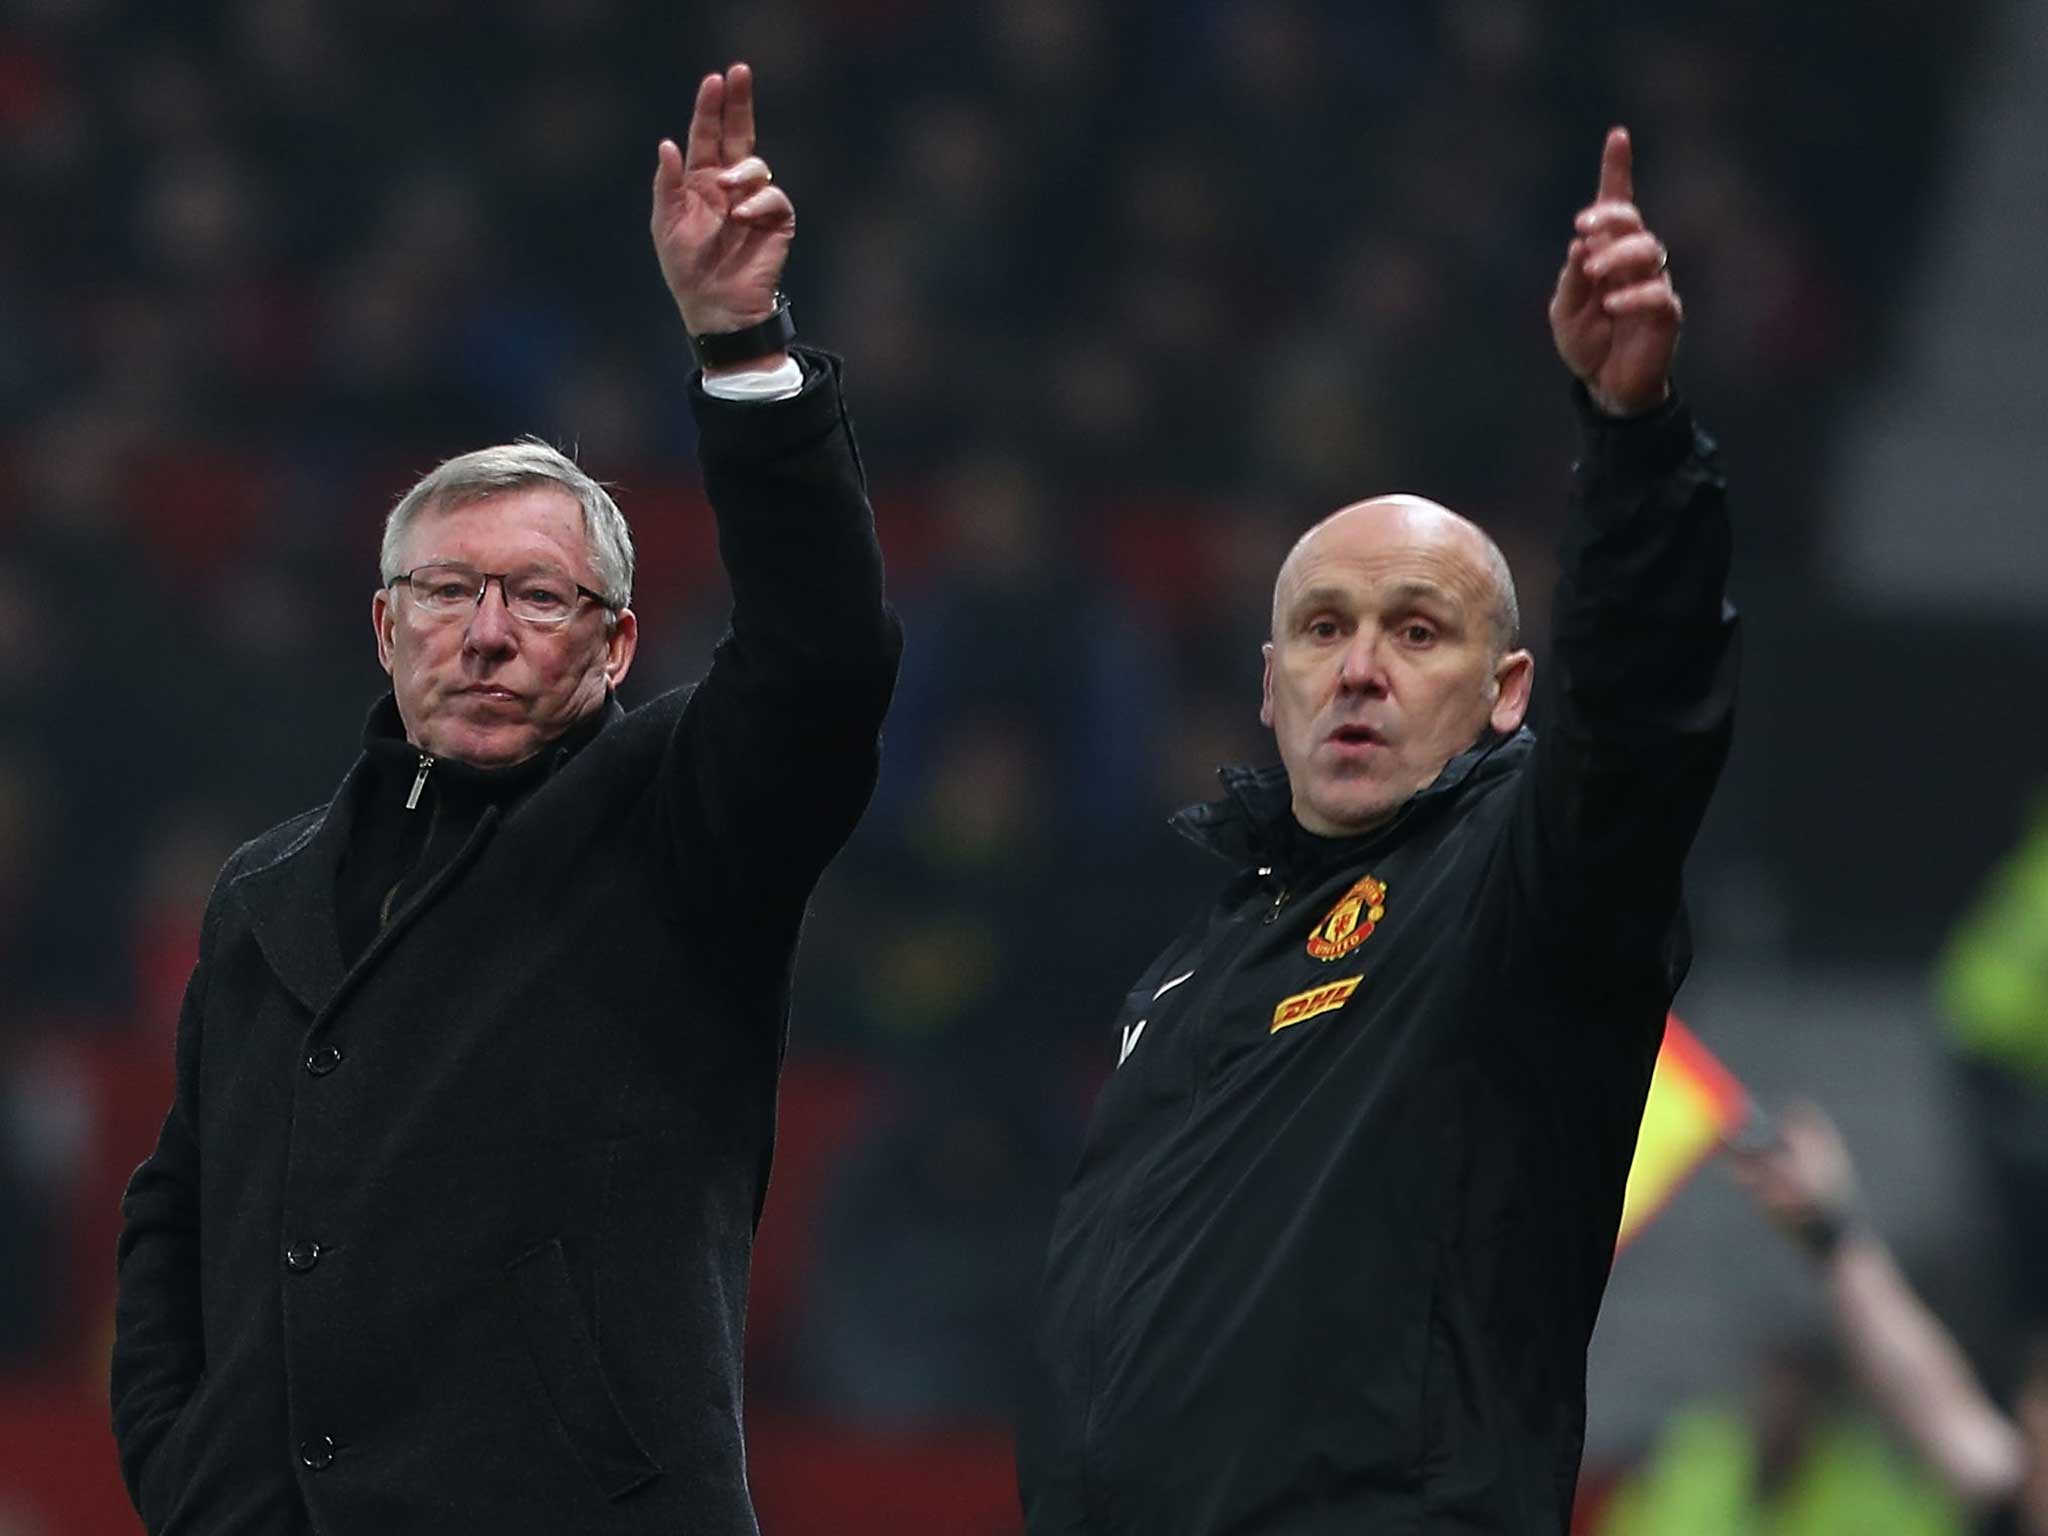 Sir Alex Ferguson placed great truth in Mike Phelan at Old Trafford